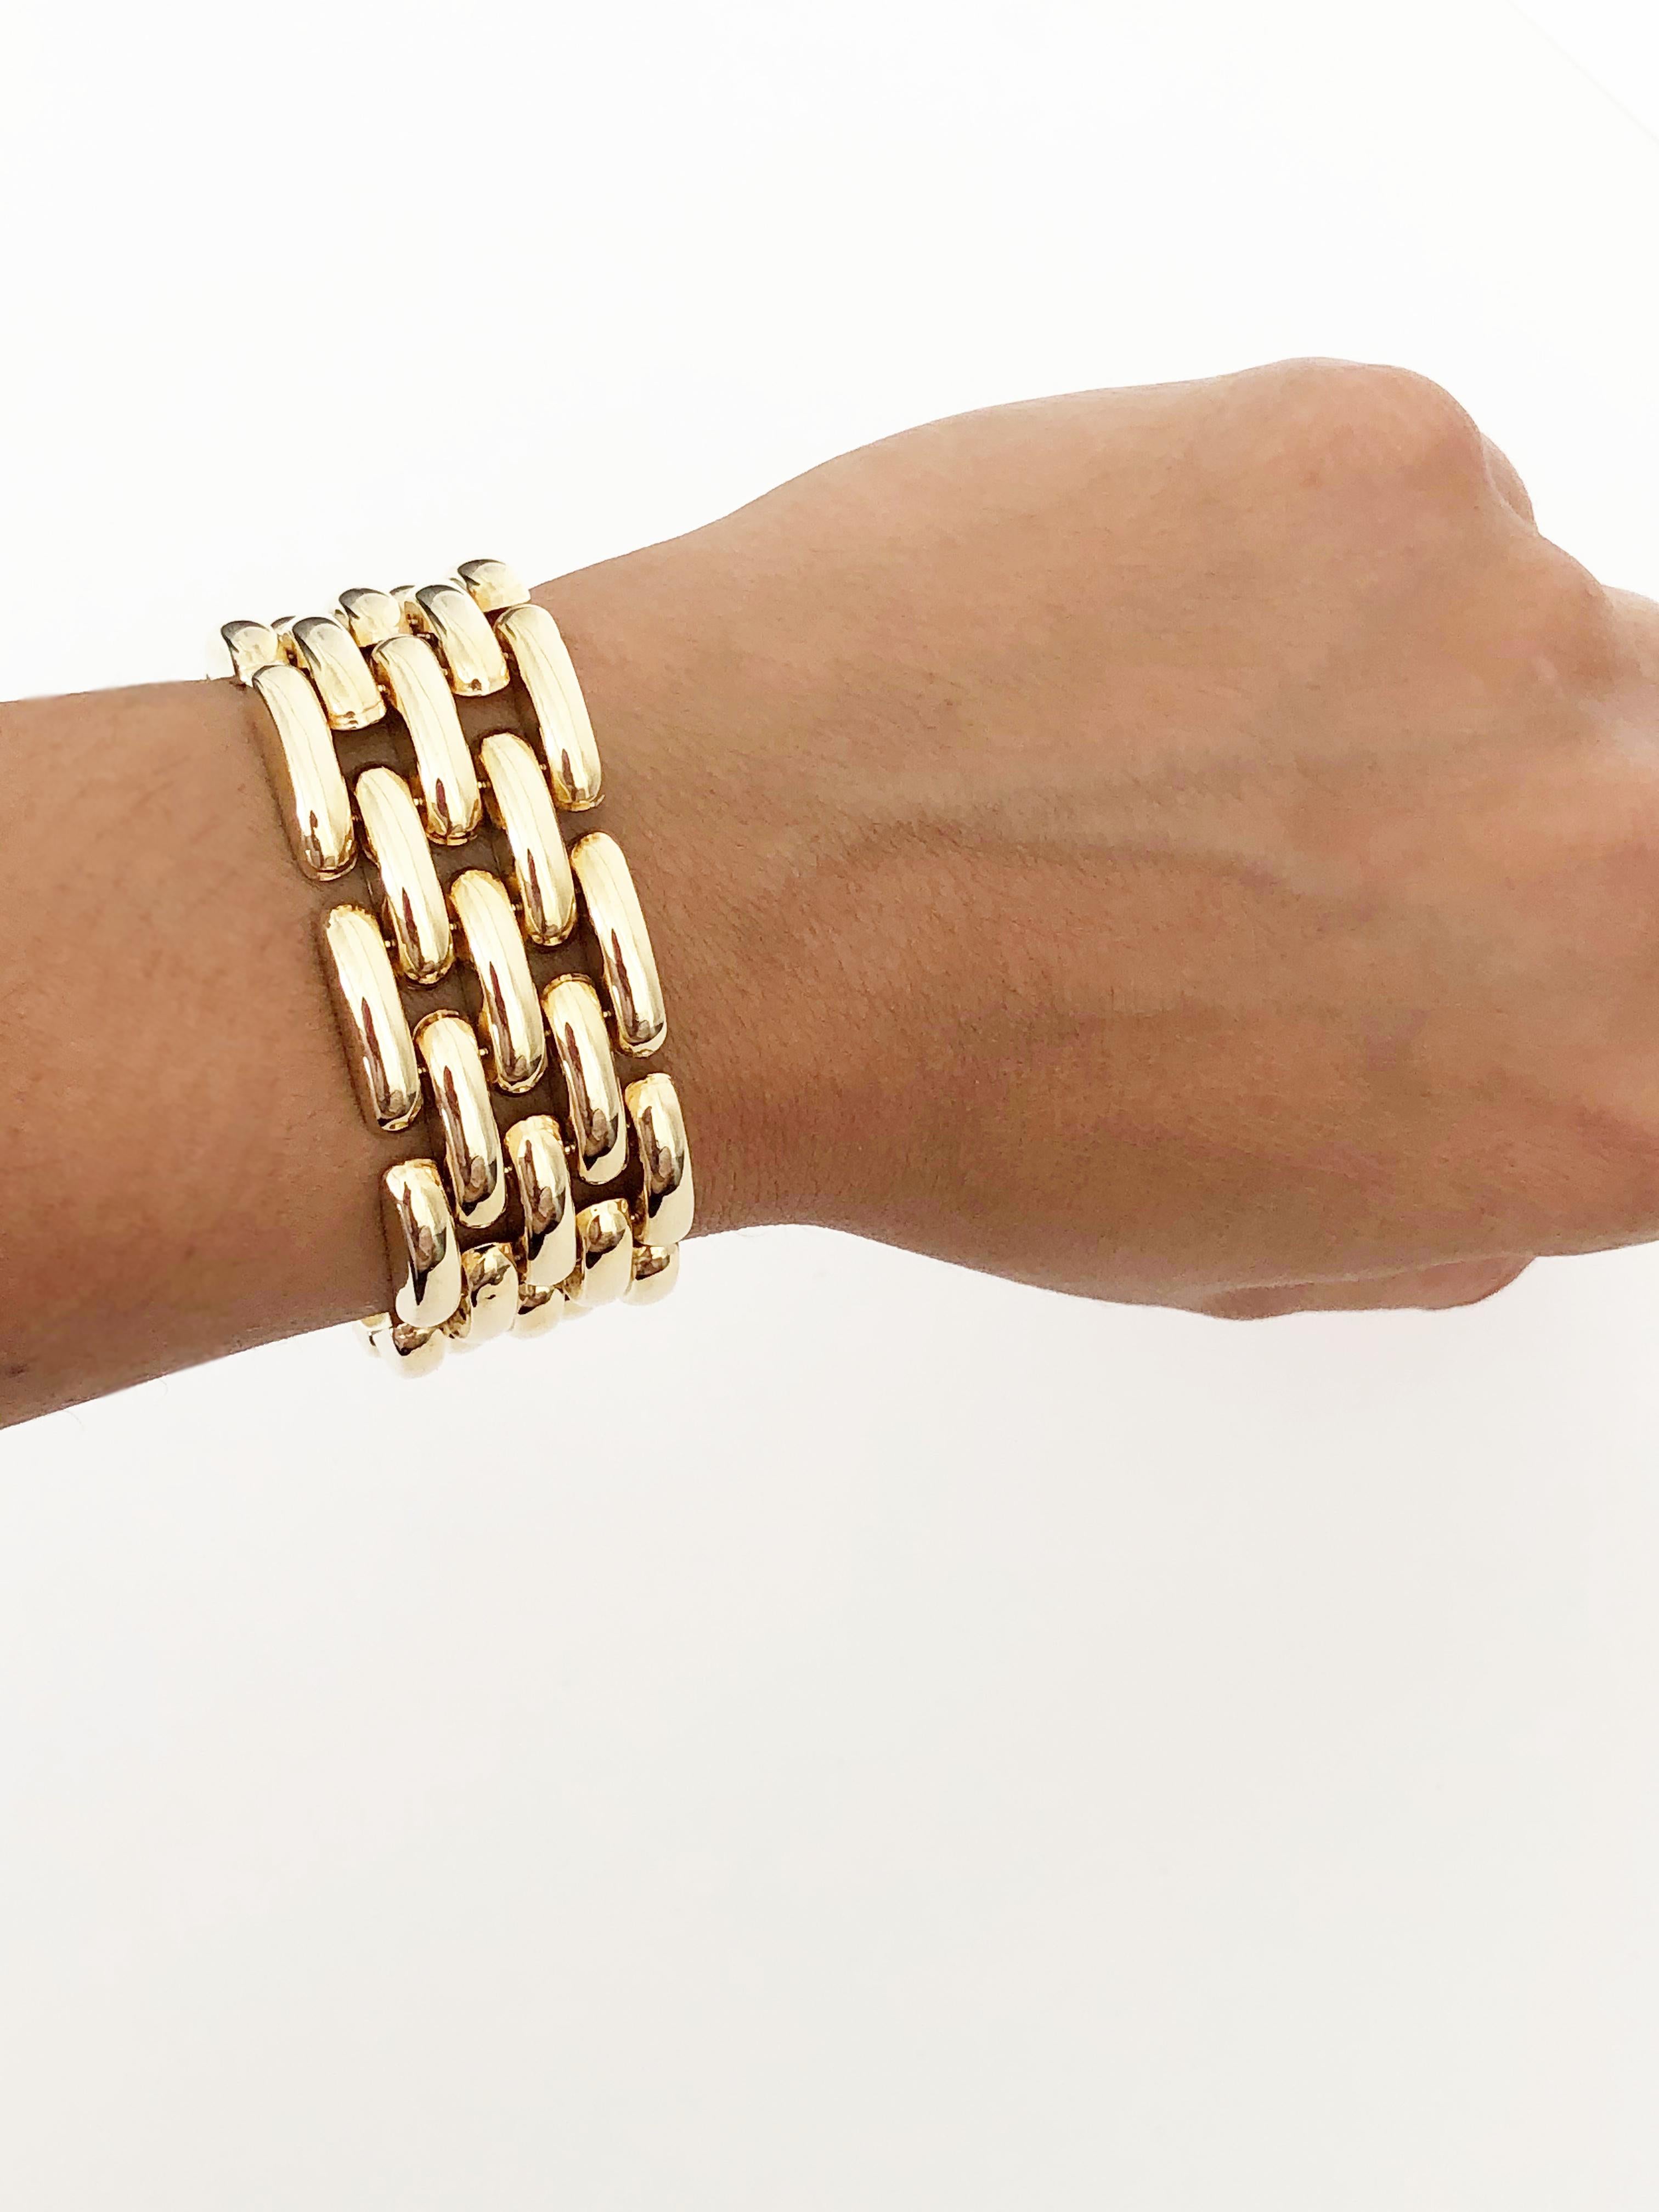 Beautiful yellow gold link bracelet handmade in 14k.  Estate piece in excellent condition.  Length 7.25 and 51.78 grams.  Perfect for a classic big look that you can stack or wear on it's own.